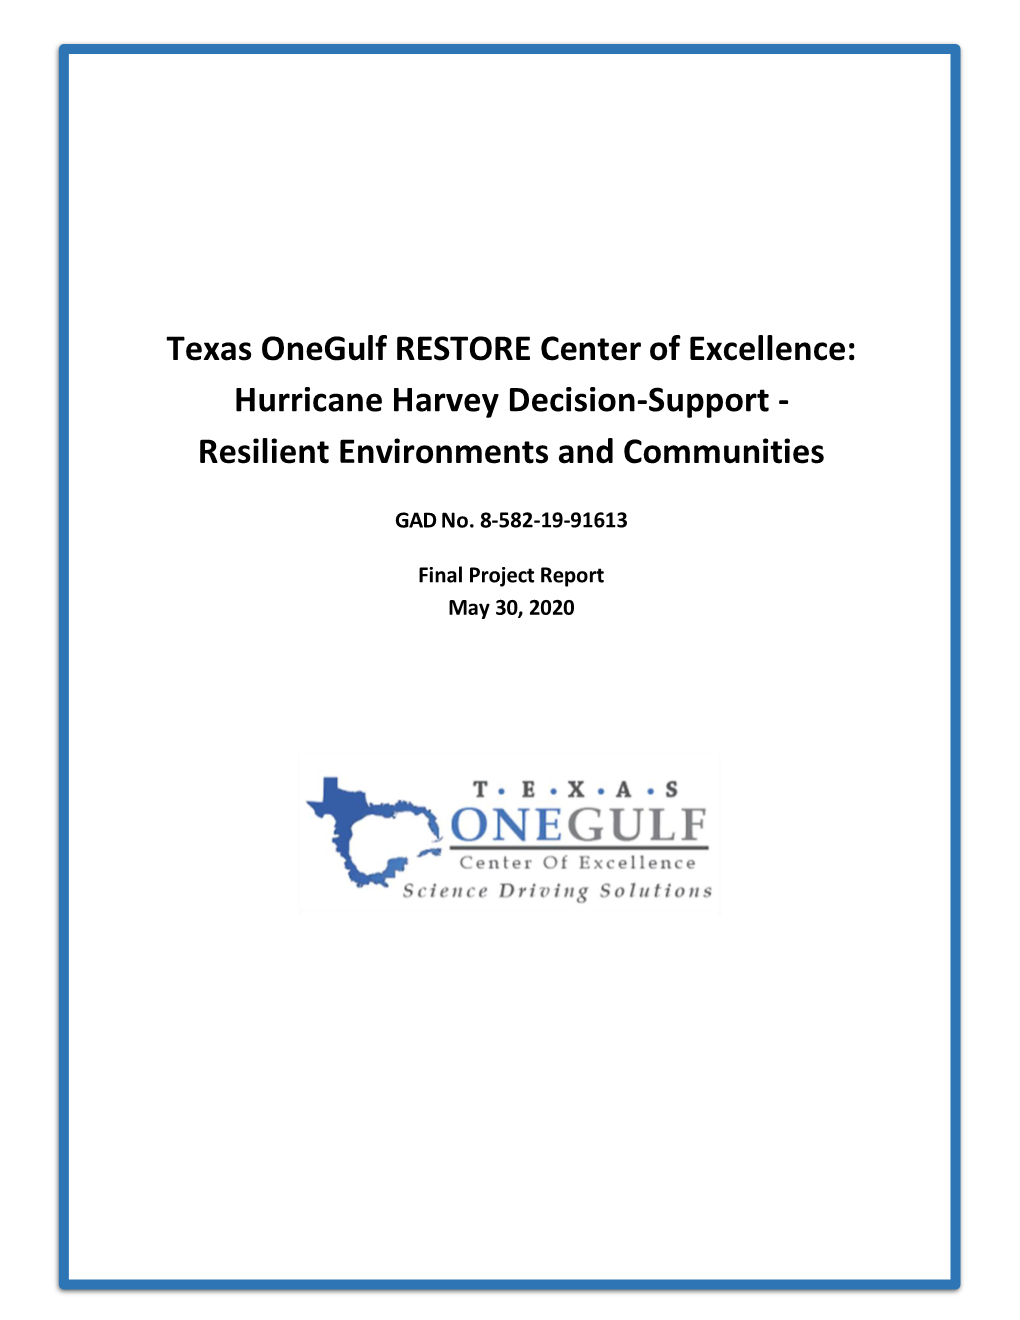 Hurricane Harvey Decision-Support - Resilient Environments and Communities